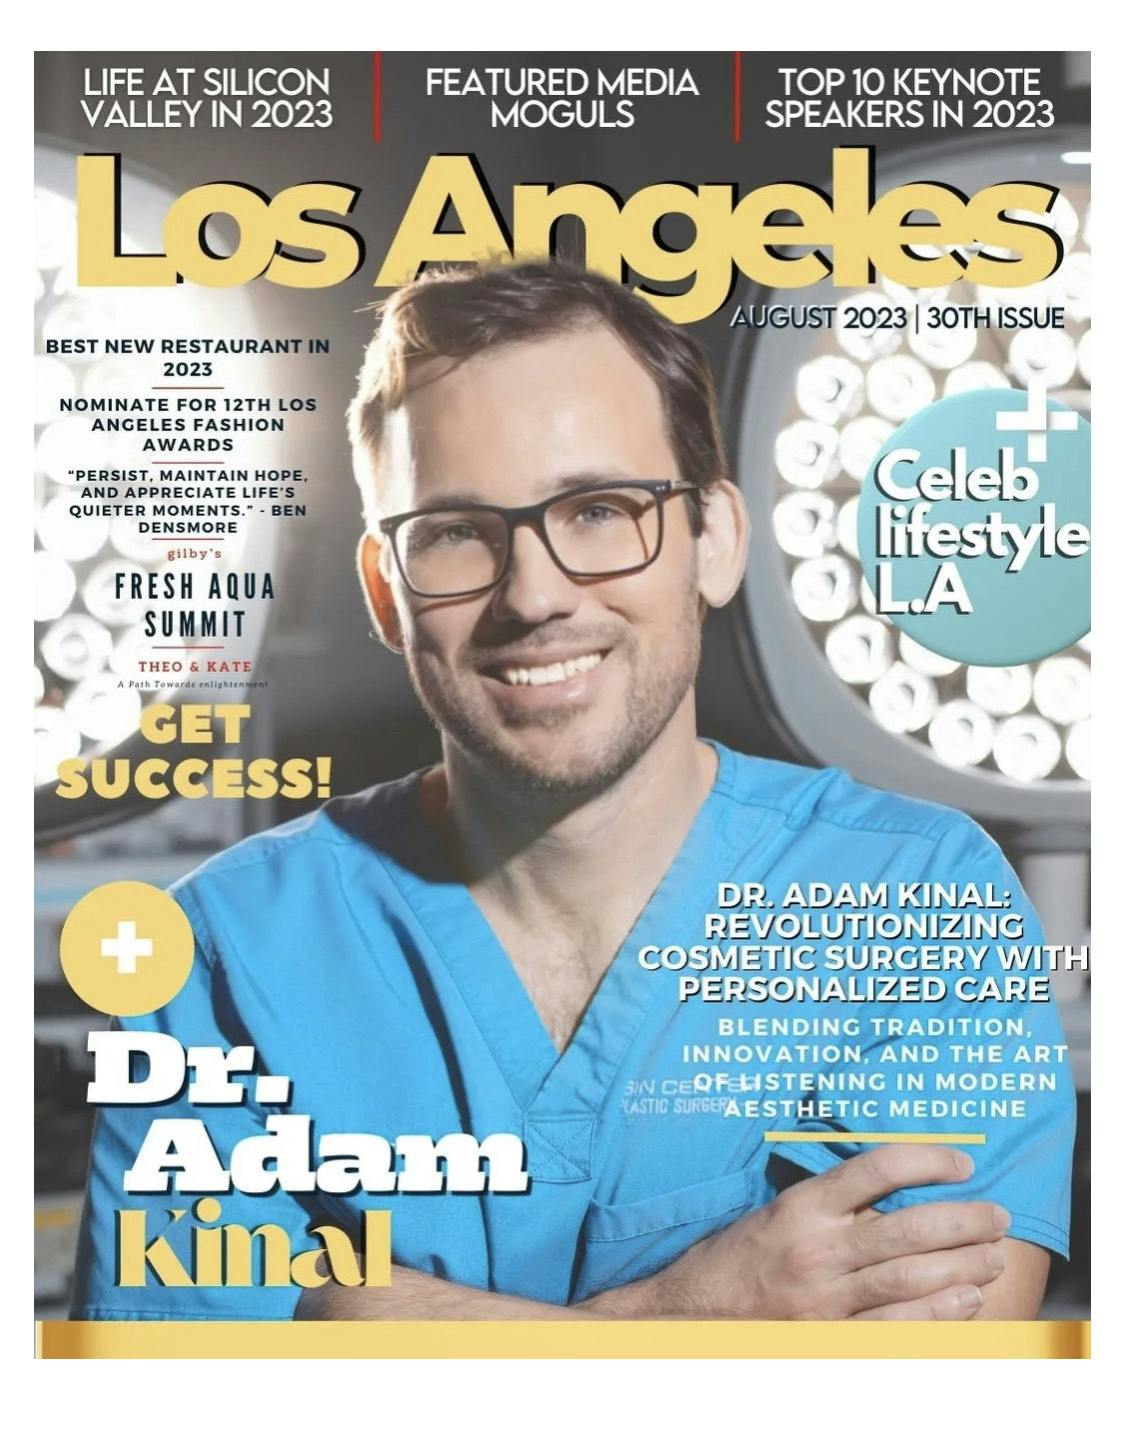 Dr. Adam Kinal: Personalizing the Future of Cosmetic Surgery.